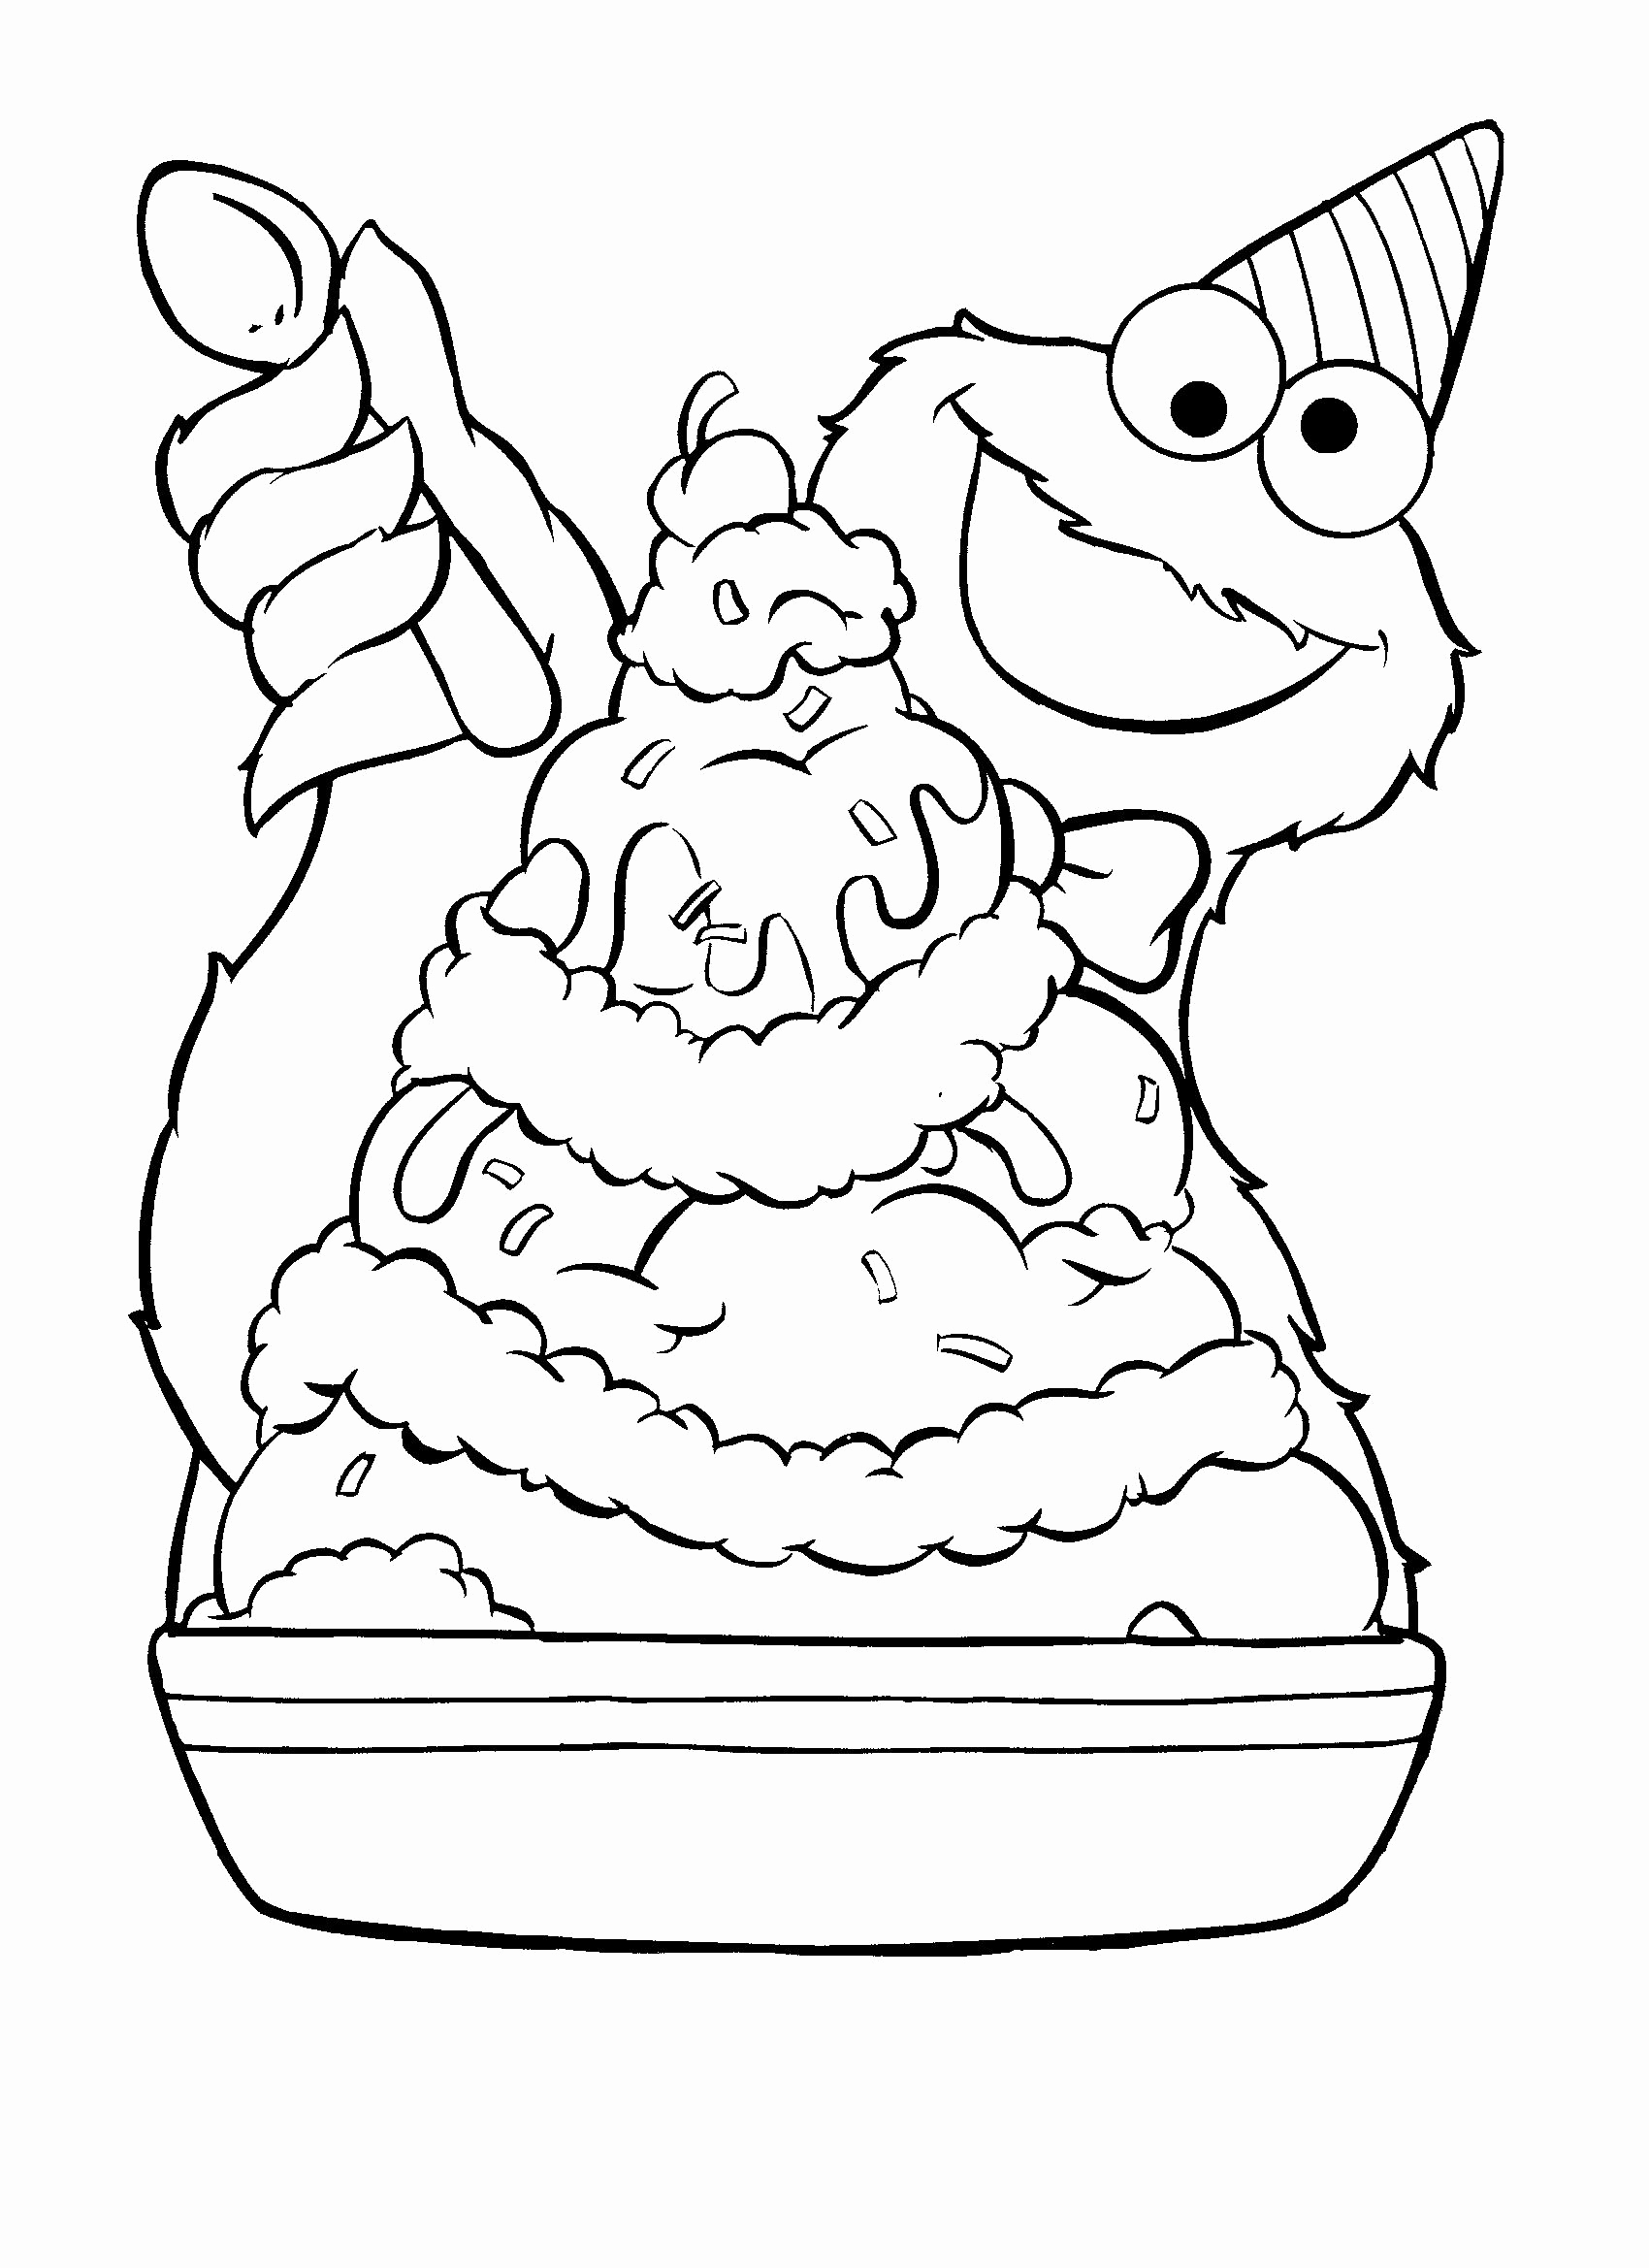 Cookie Monster Coloring Page at GetColorings.com | Free printable